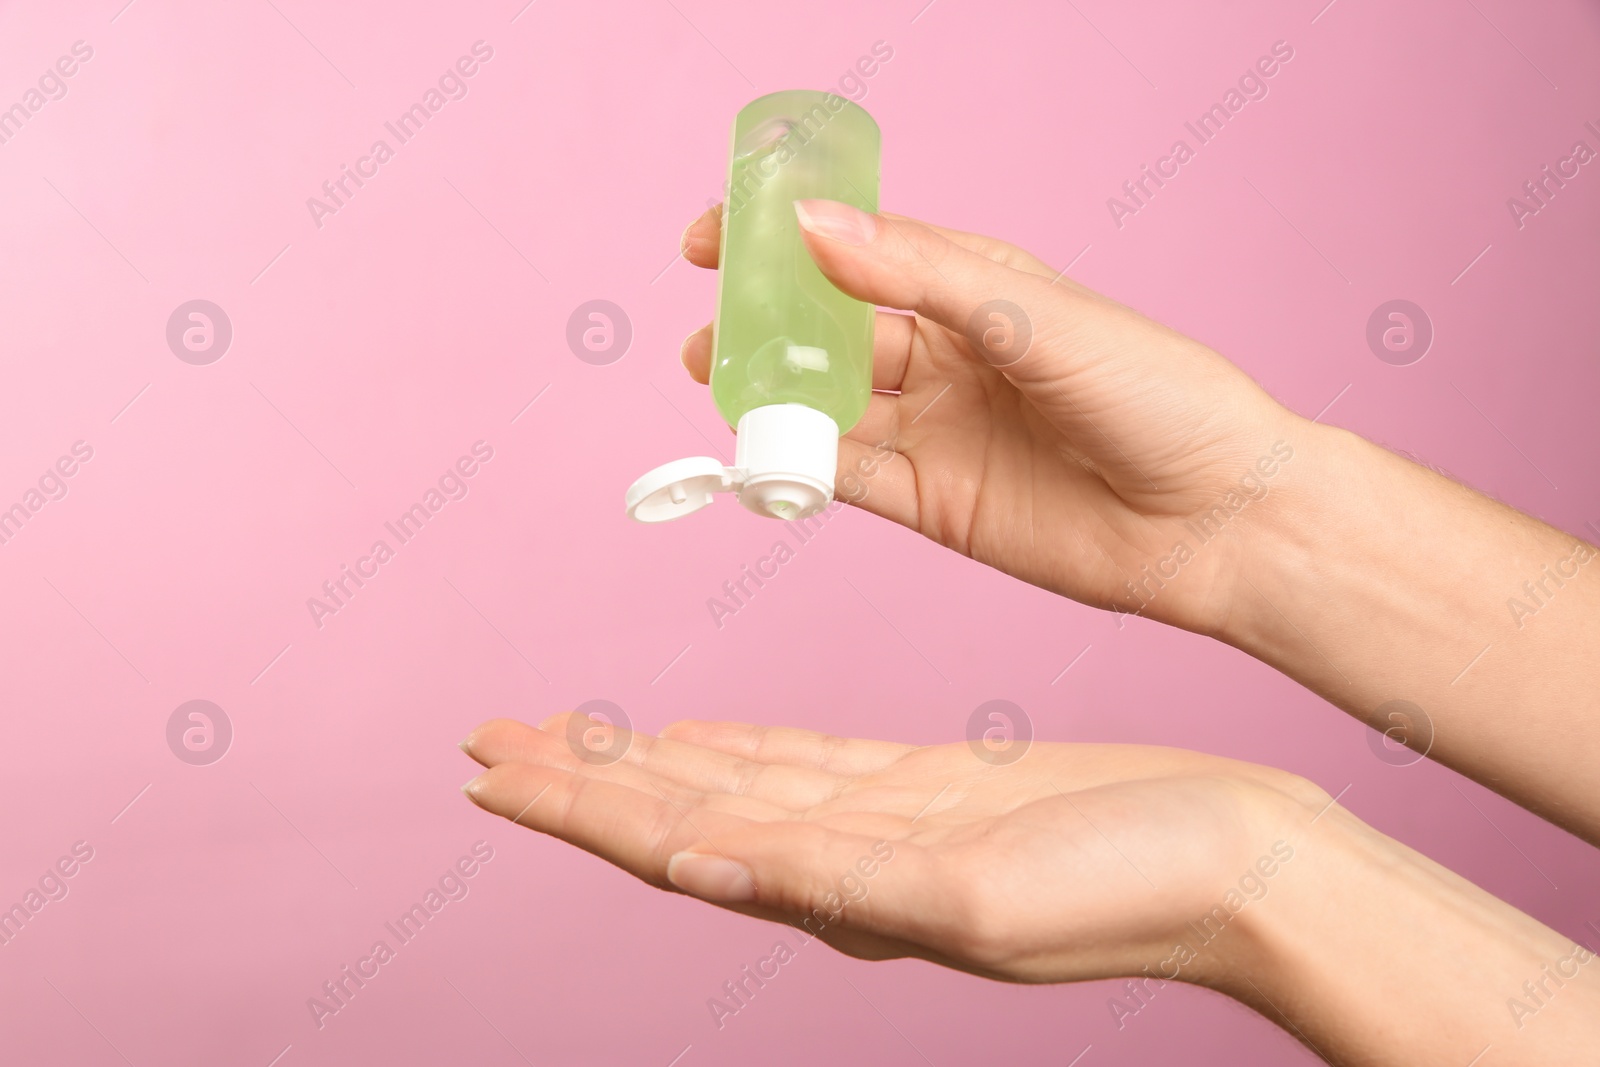 Photo of Woman applying antiseptic gel on pink background, closeup